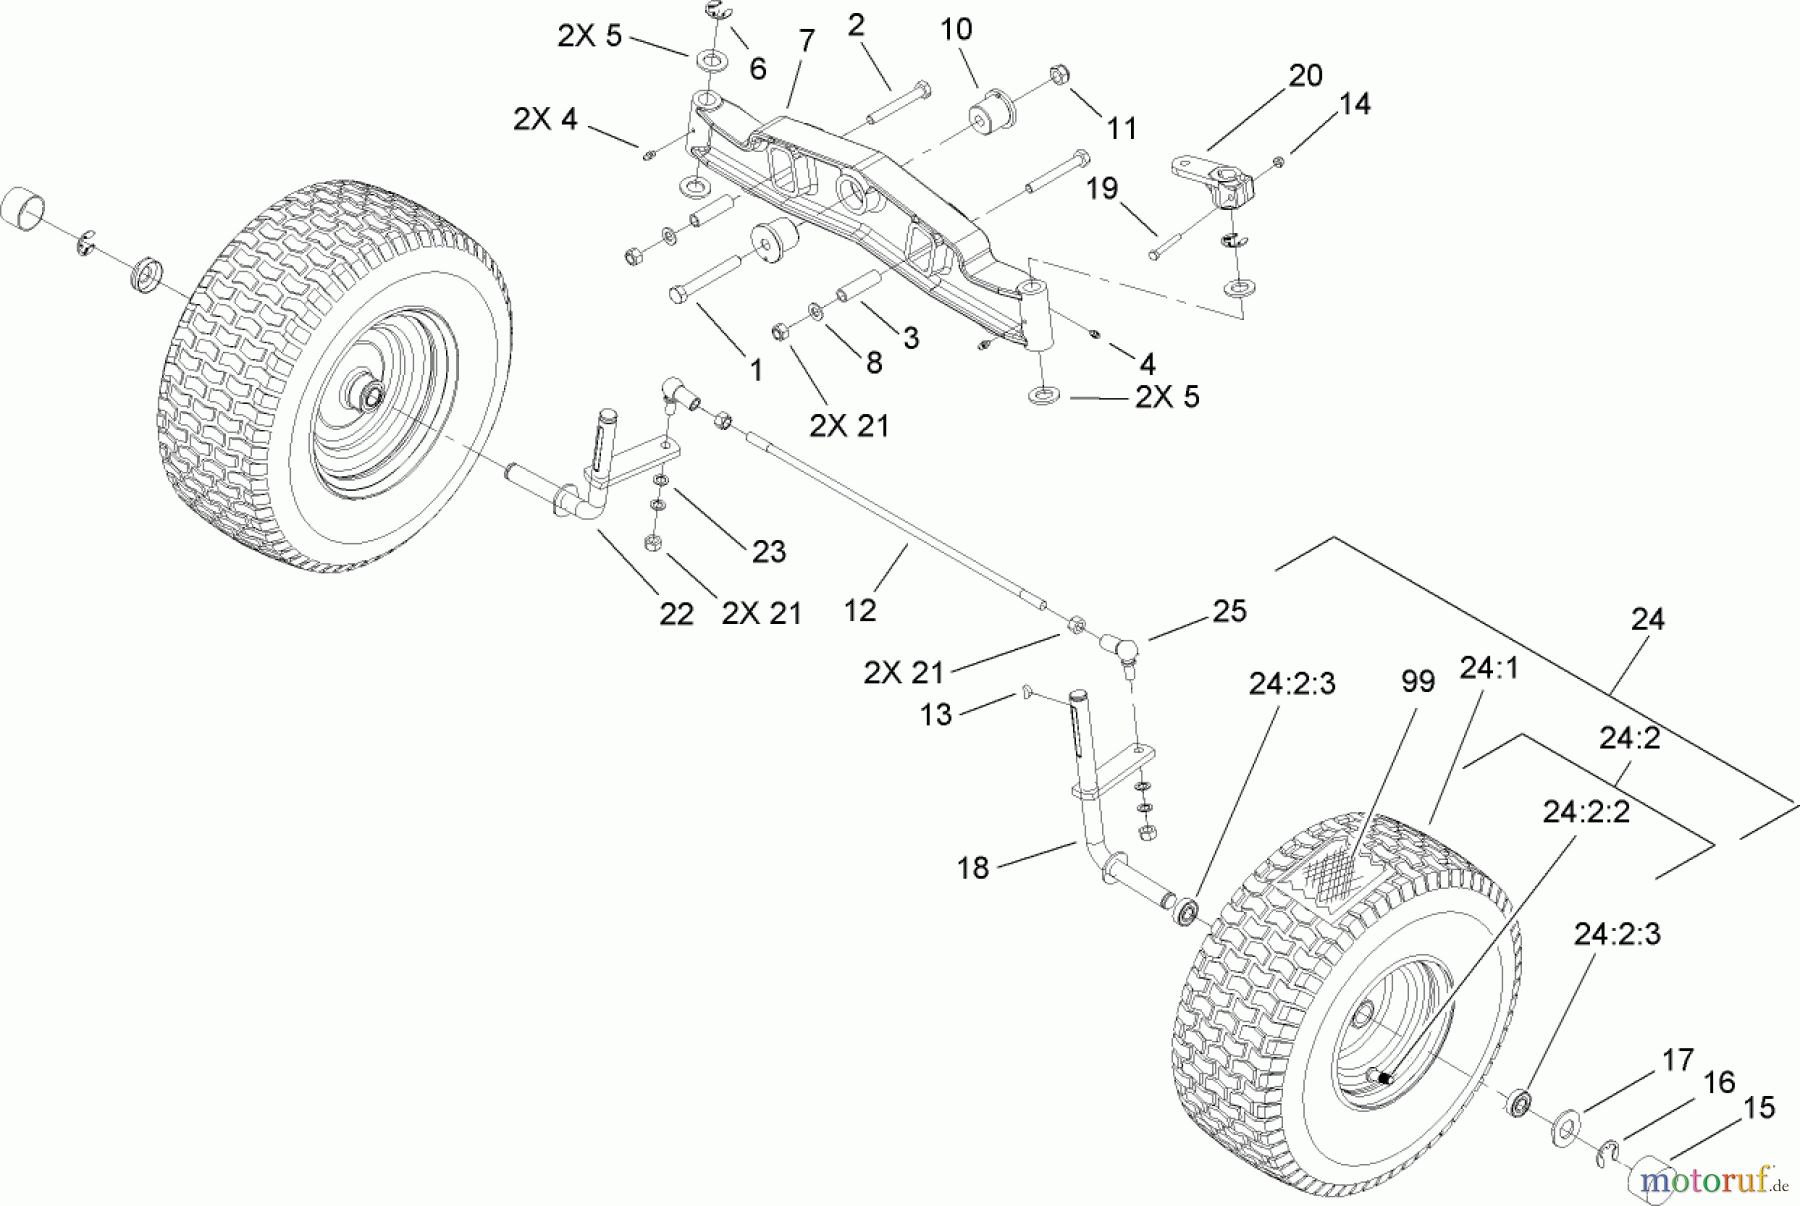  Toro Neu Mowers, Lawn & Garden Tractor Seite 1 74592 (DH 220) - Toro DH 220 Lawn Tractor, 2007 (270000652-270999999) FRONT AXLE ASSEMBLY